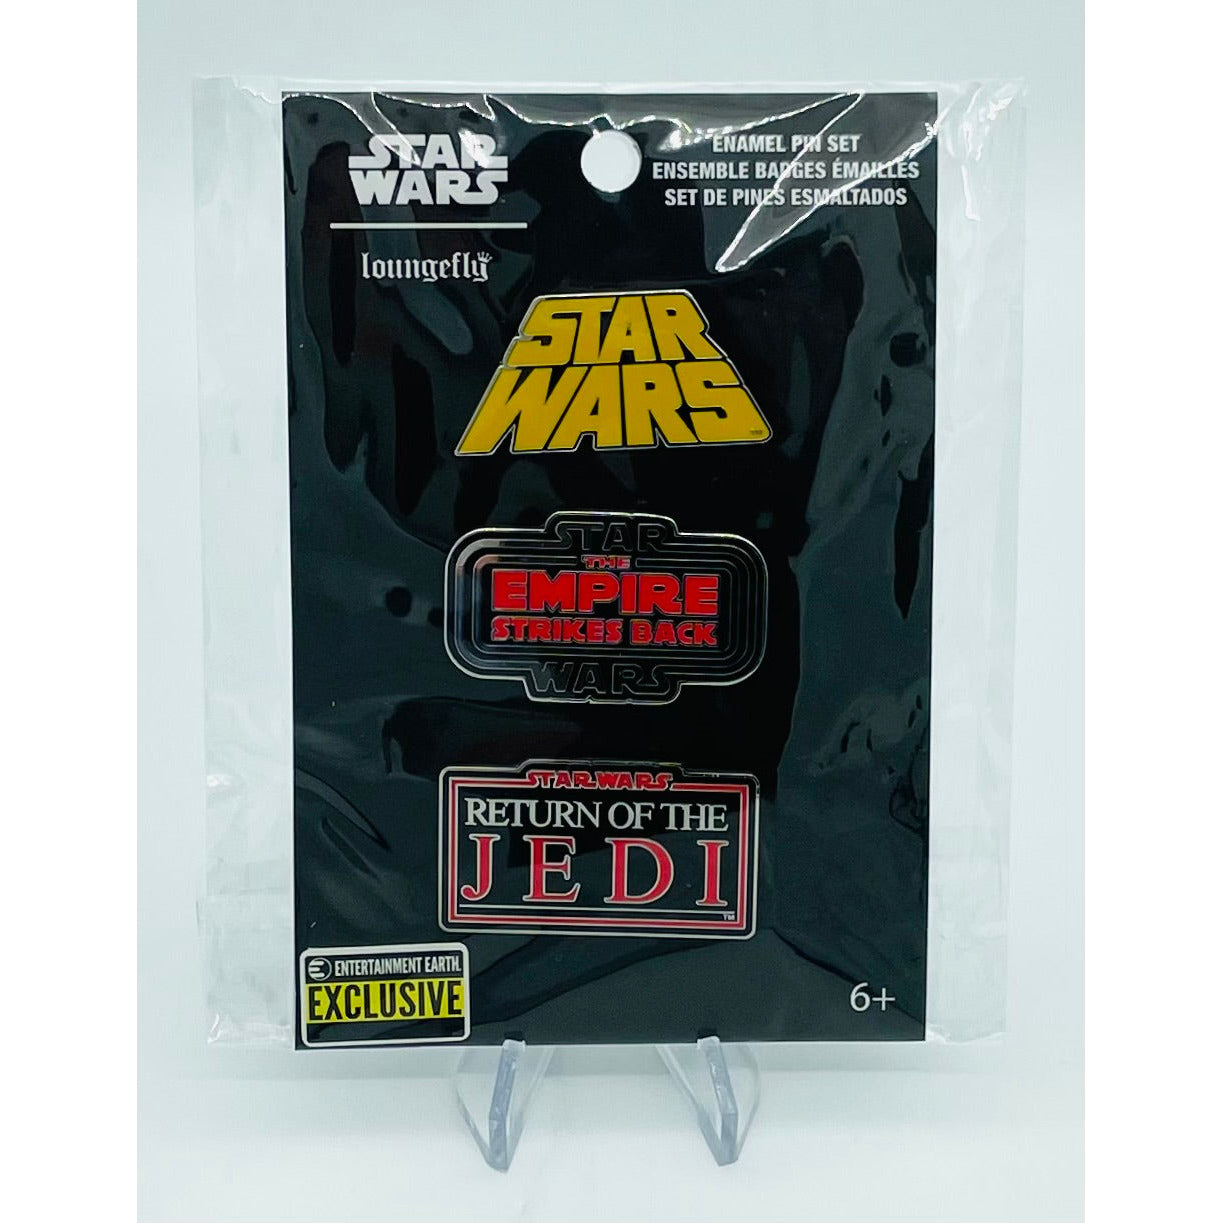 Loungefly Star Wars Original Trilogy 3 Pin Set, Entertainment Earth Exclusive